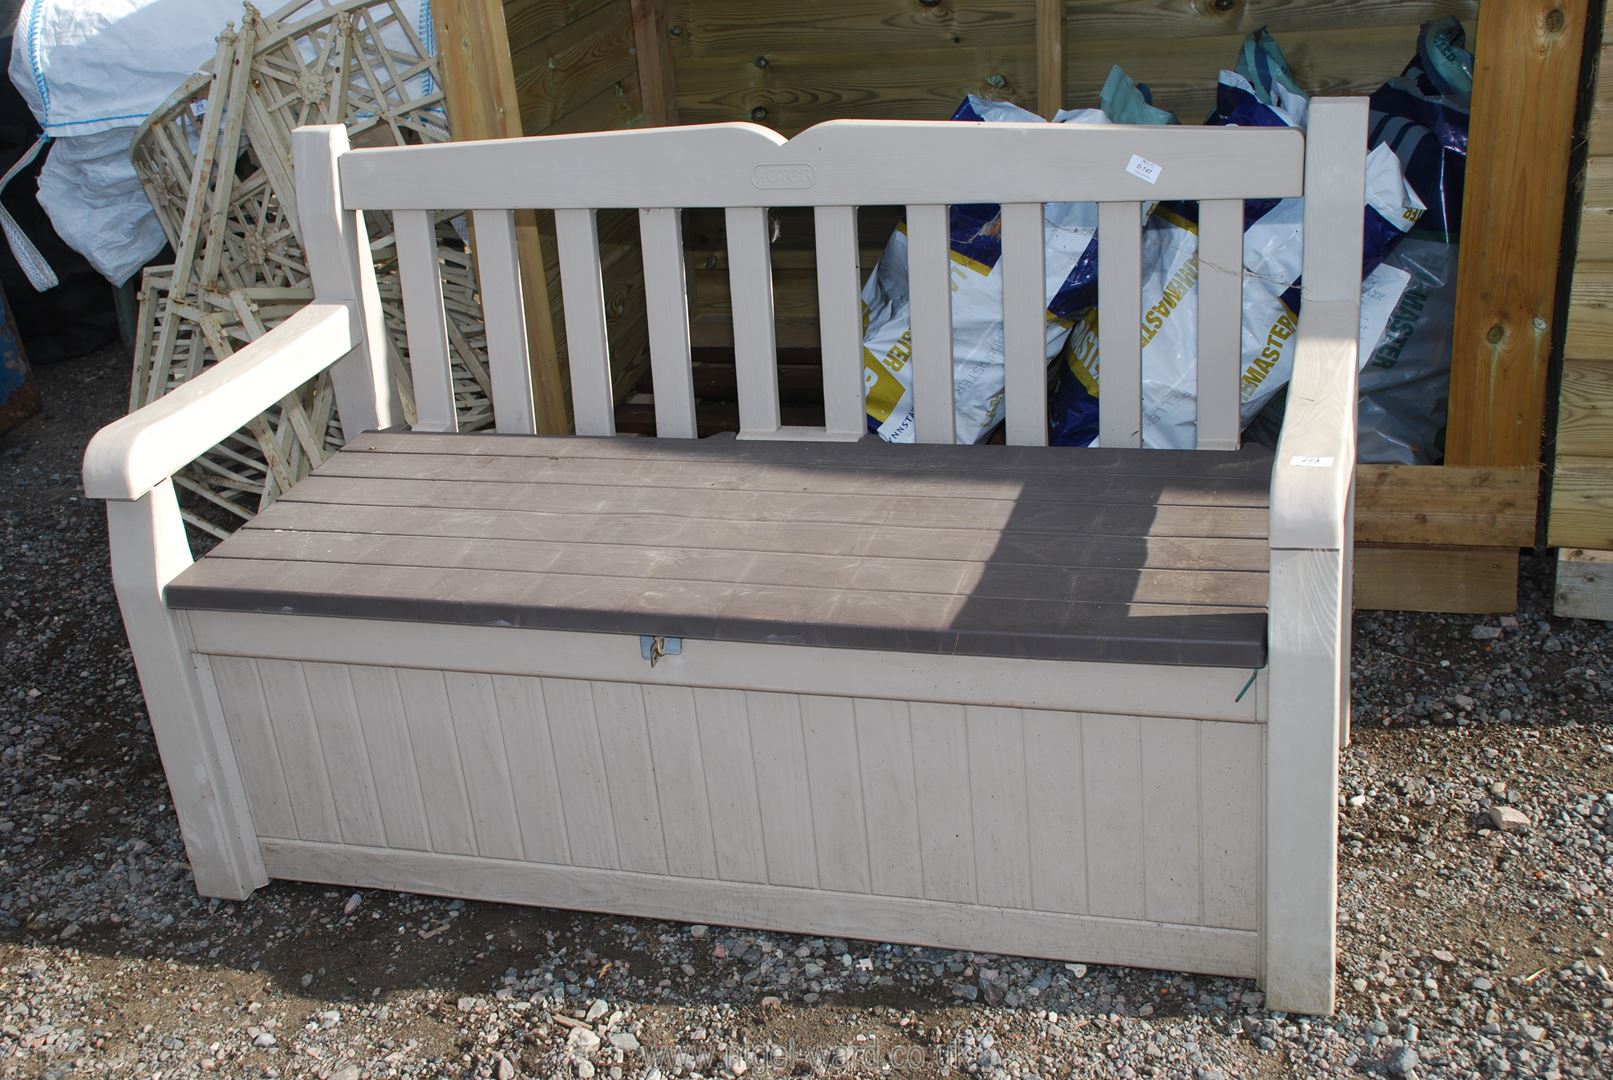 A "Keter" storage bench and contents, 55" wide x 33" high.